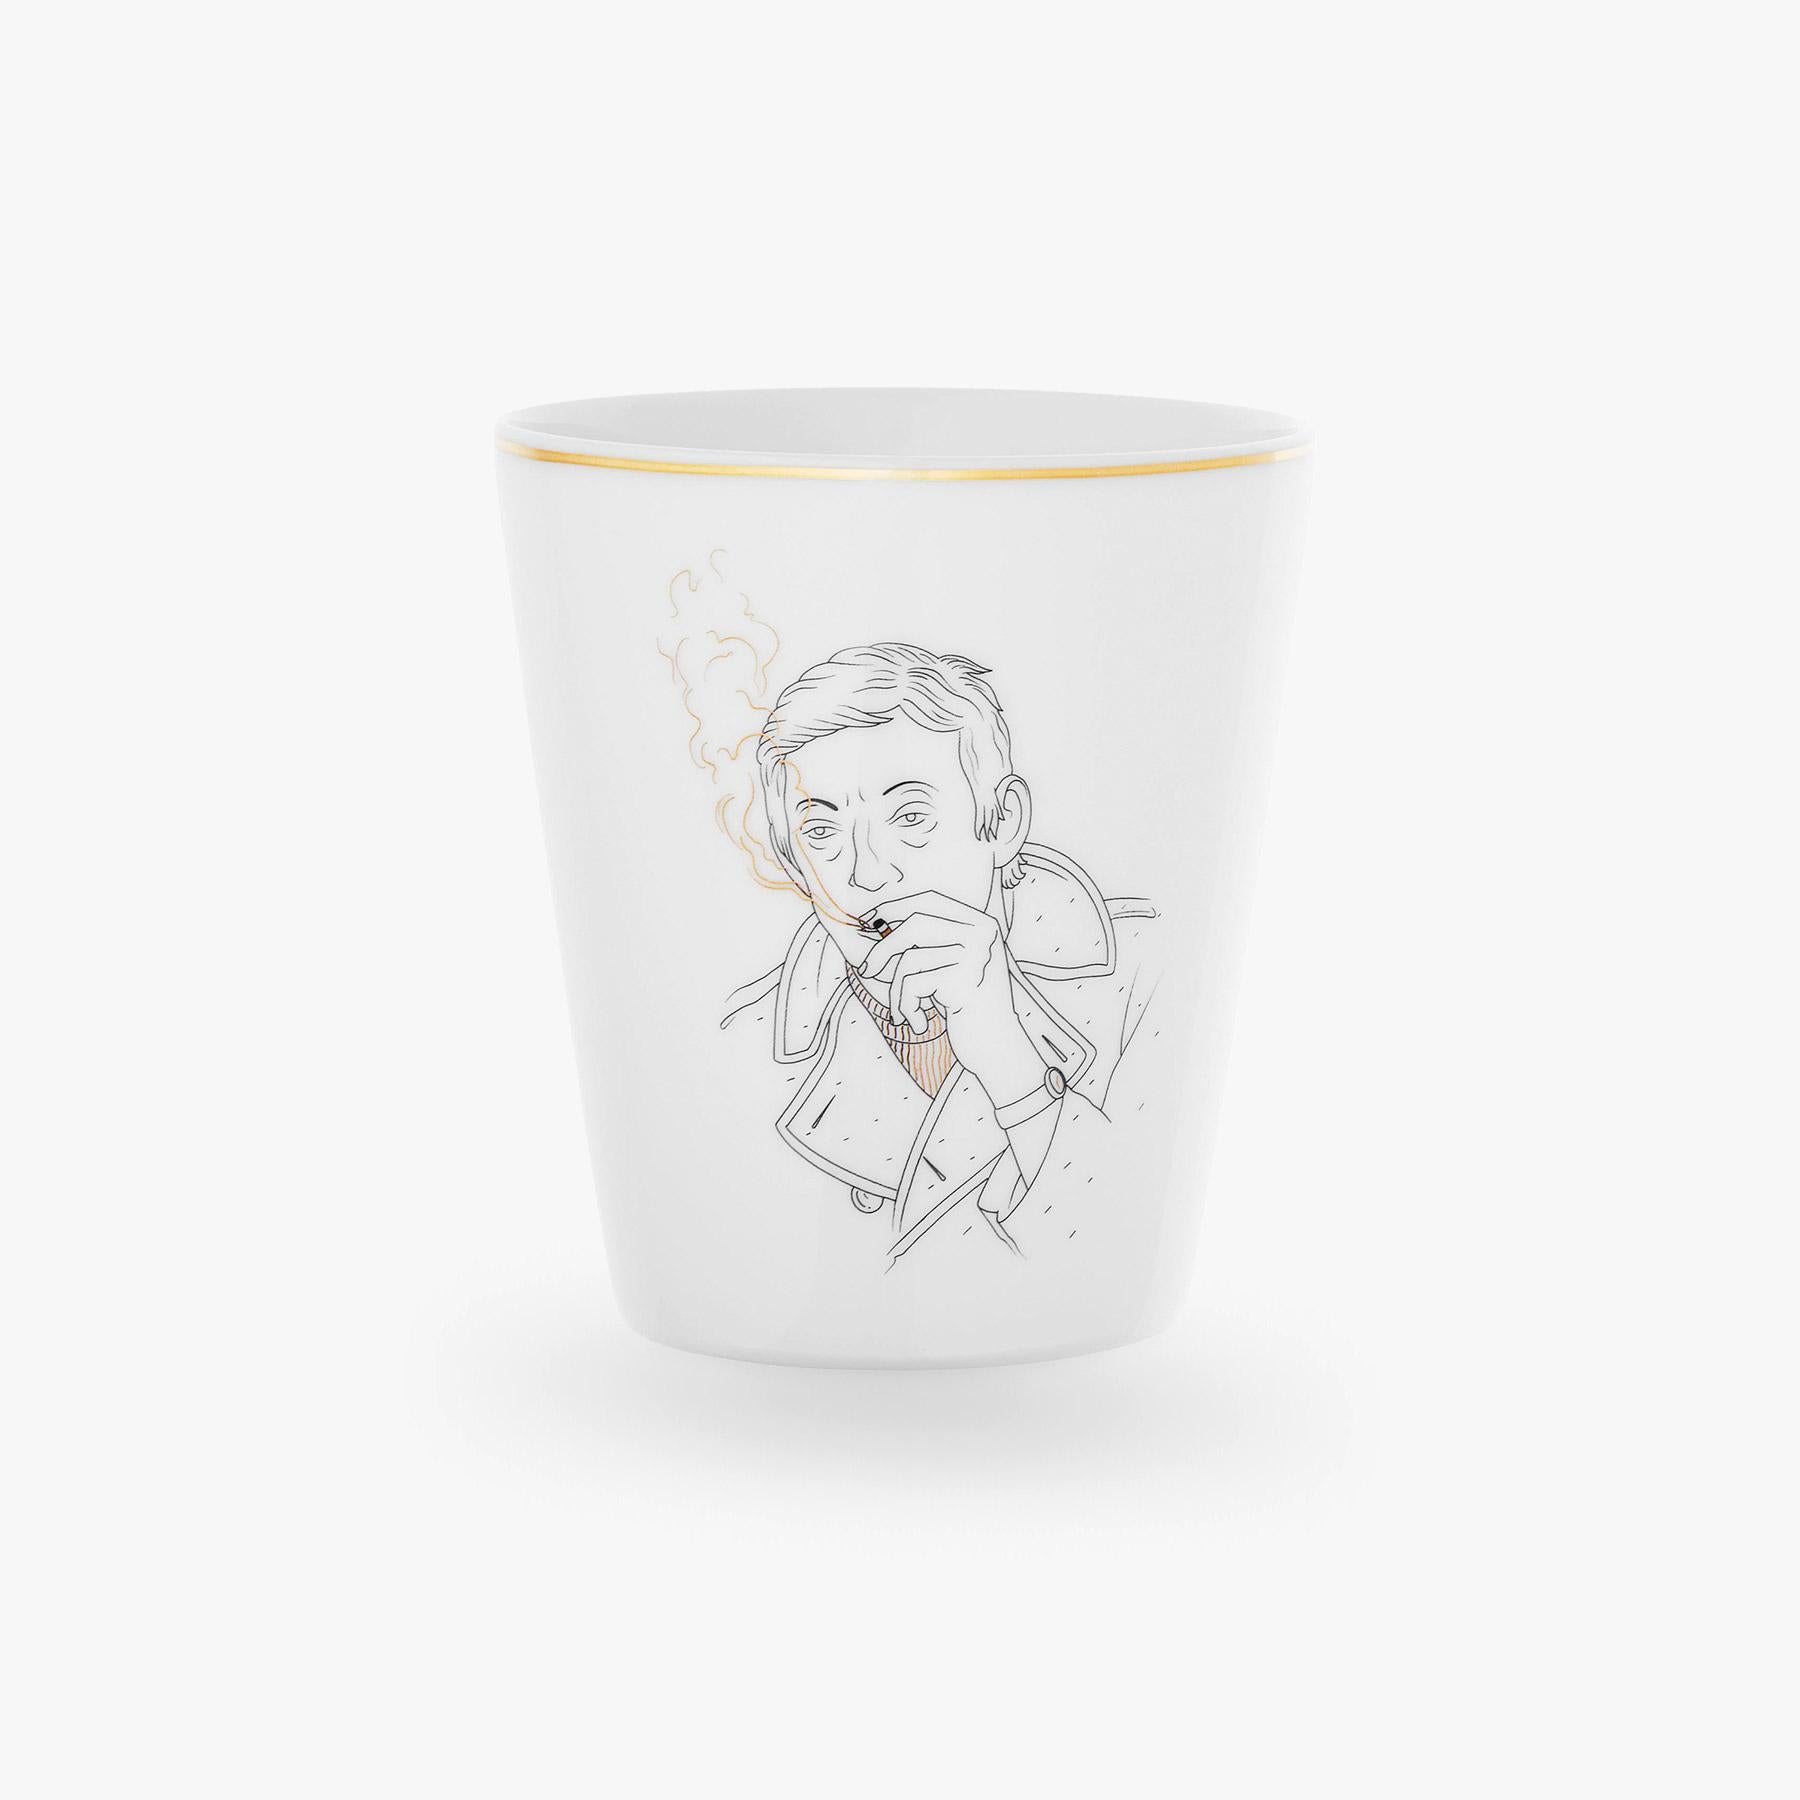 Maison Fragile and the Parisian illustrator artist Jean-Michel Tixier have joined together to create a collection that pays tribute to these men and women, key figures of history, who have made Paris as we know it.

Box with 4 mugs without handle